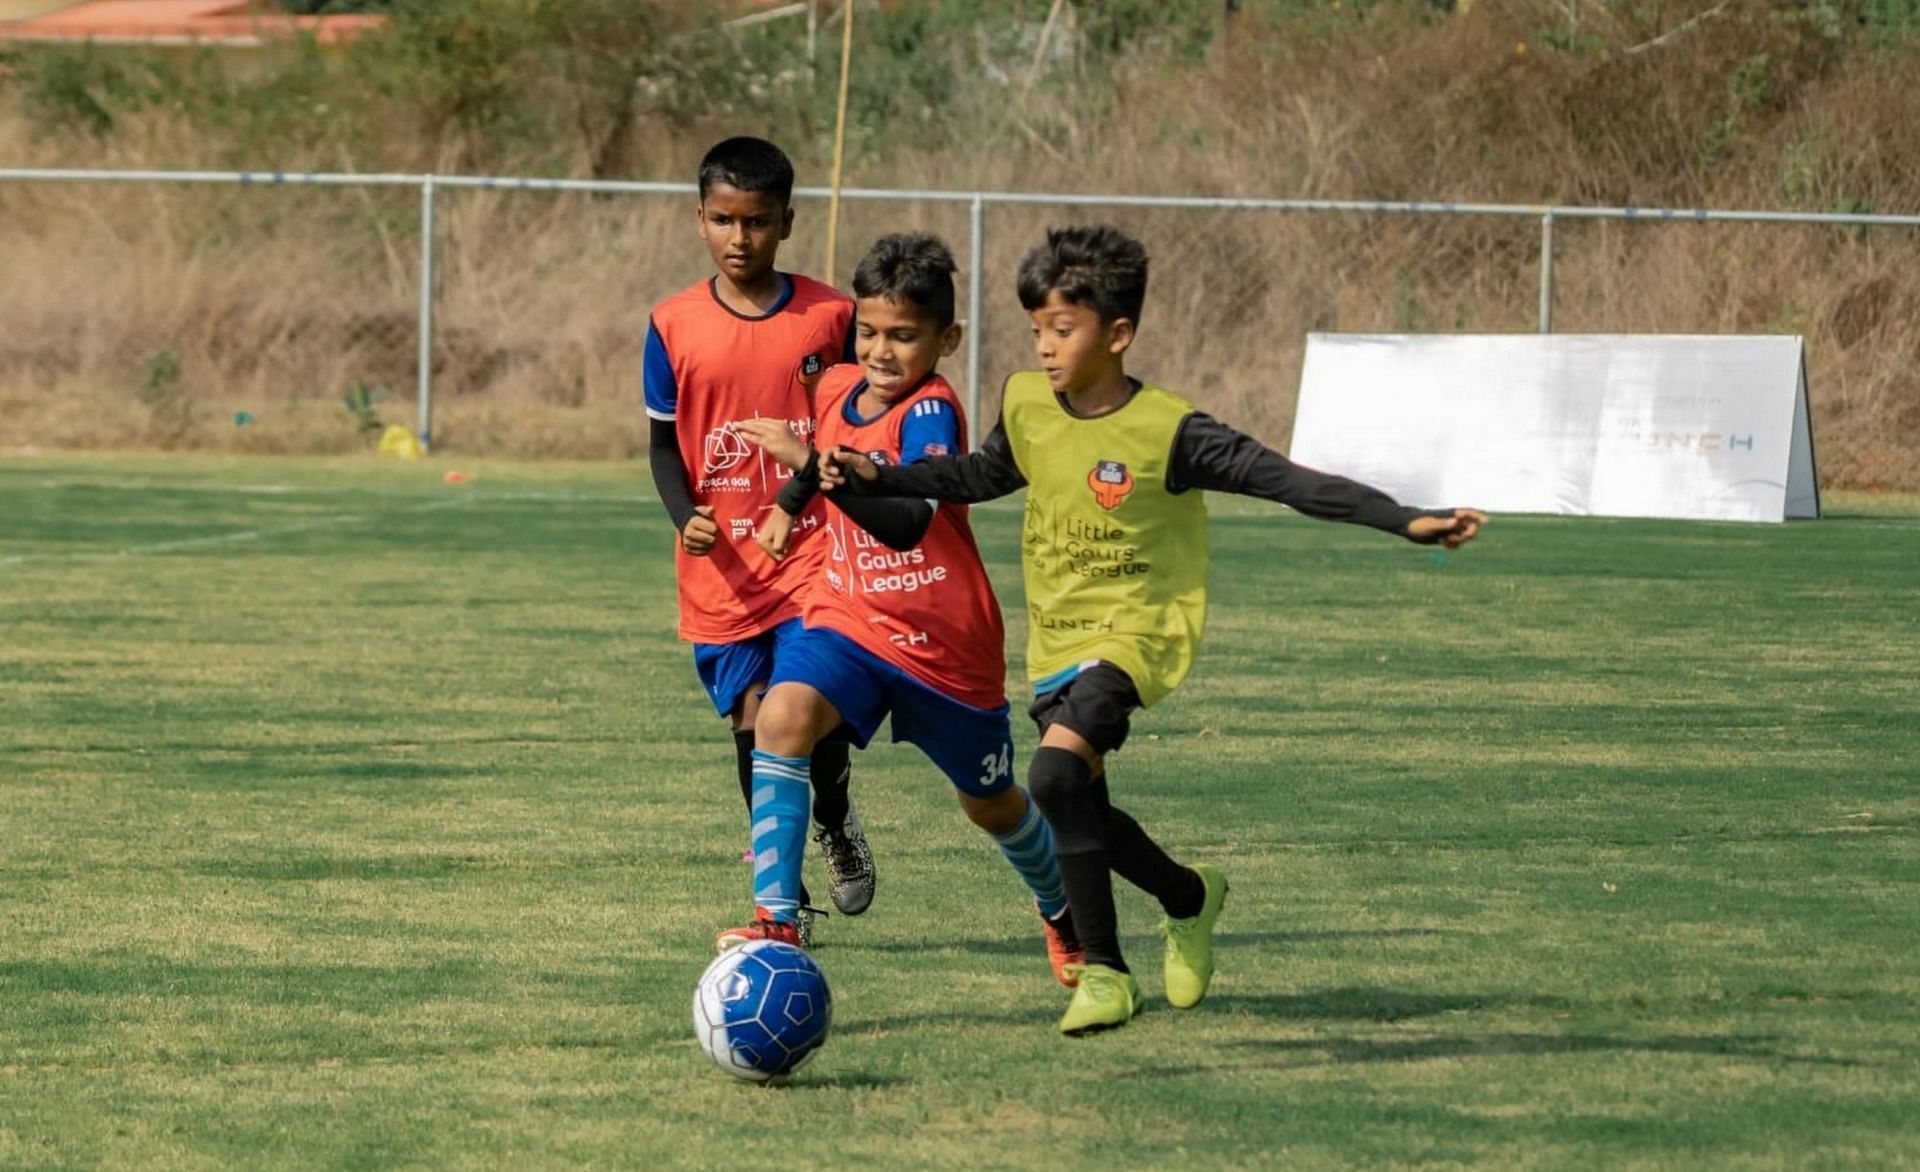 Sprinting towards a brighter future: Children play their hearts out in the Little Gaurs League. Image: FC Goa on Facebook